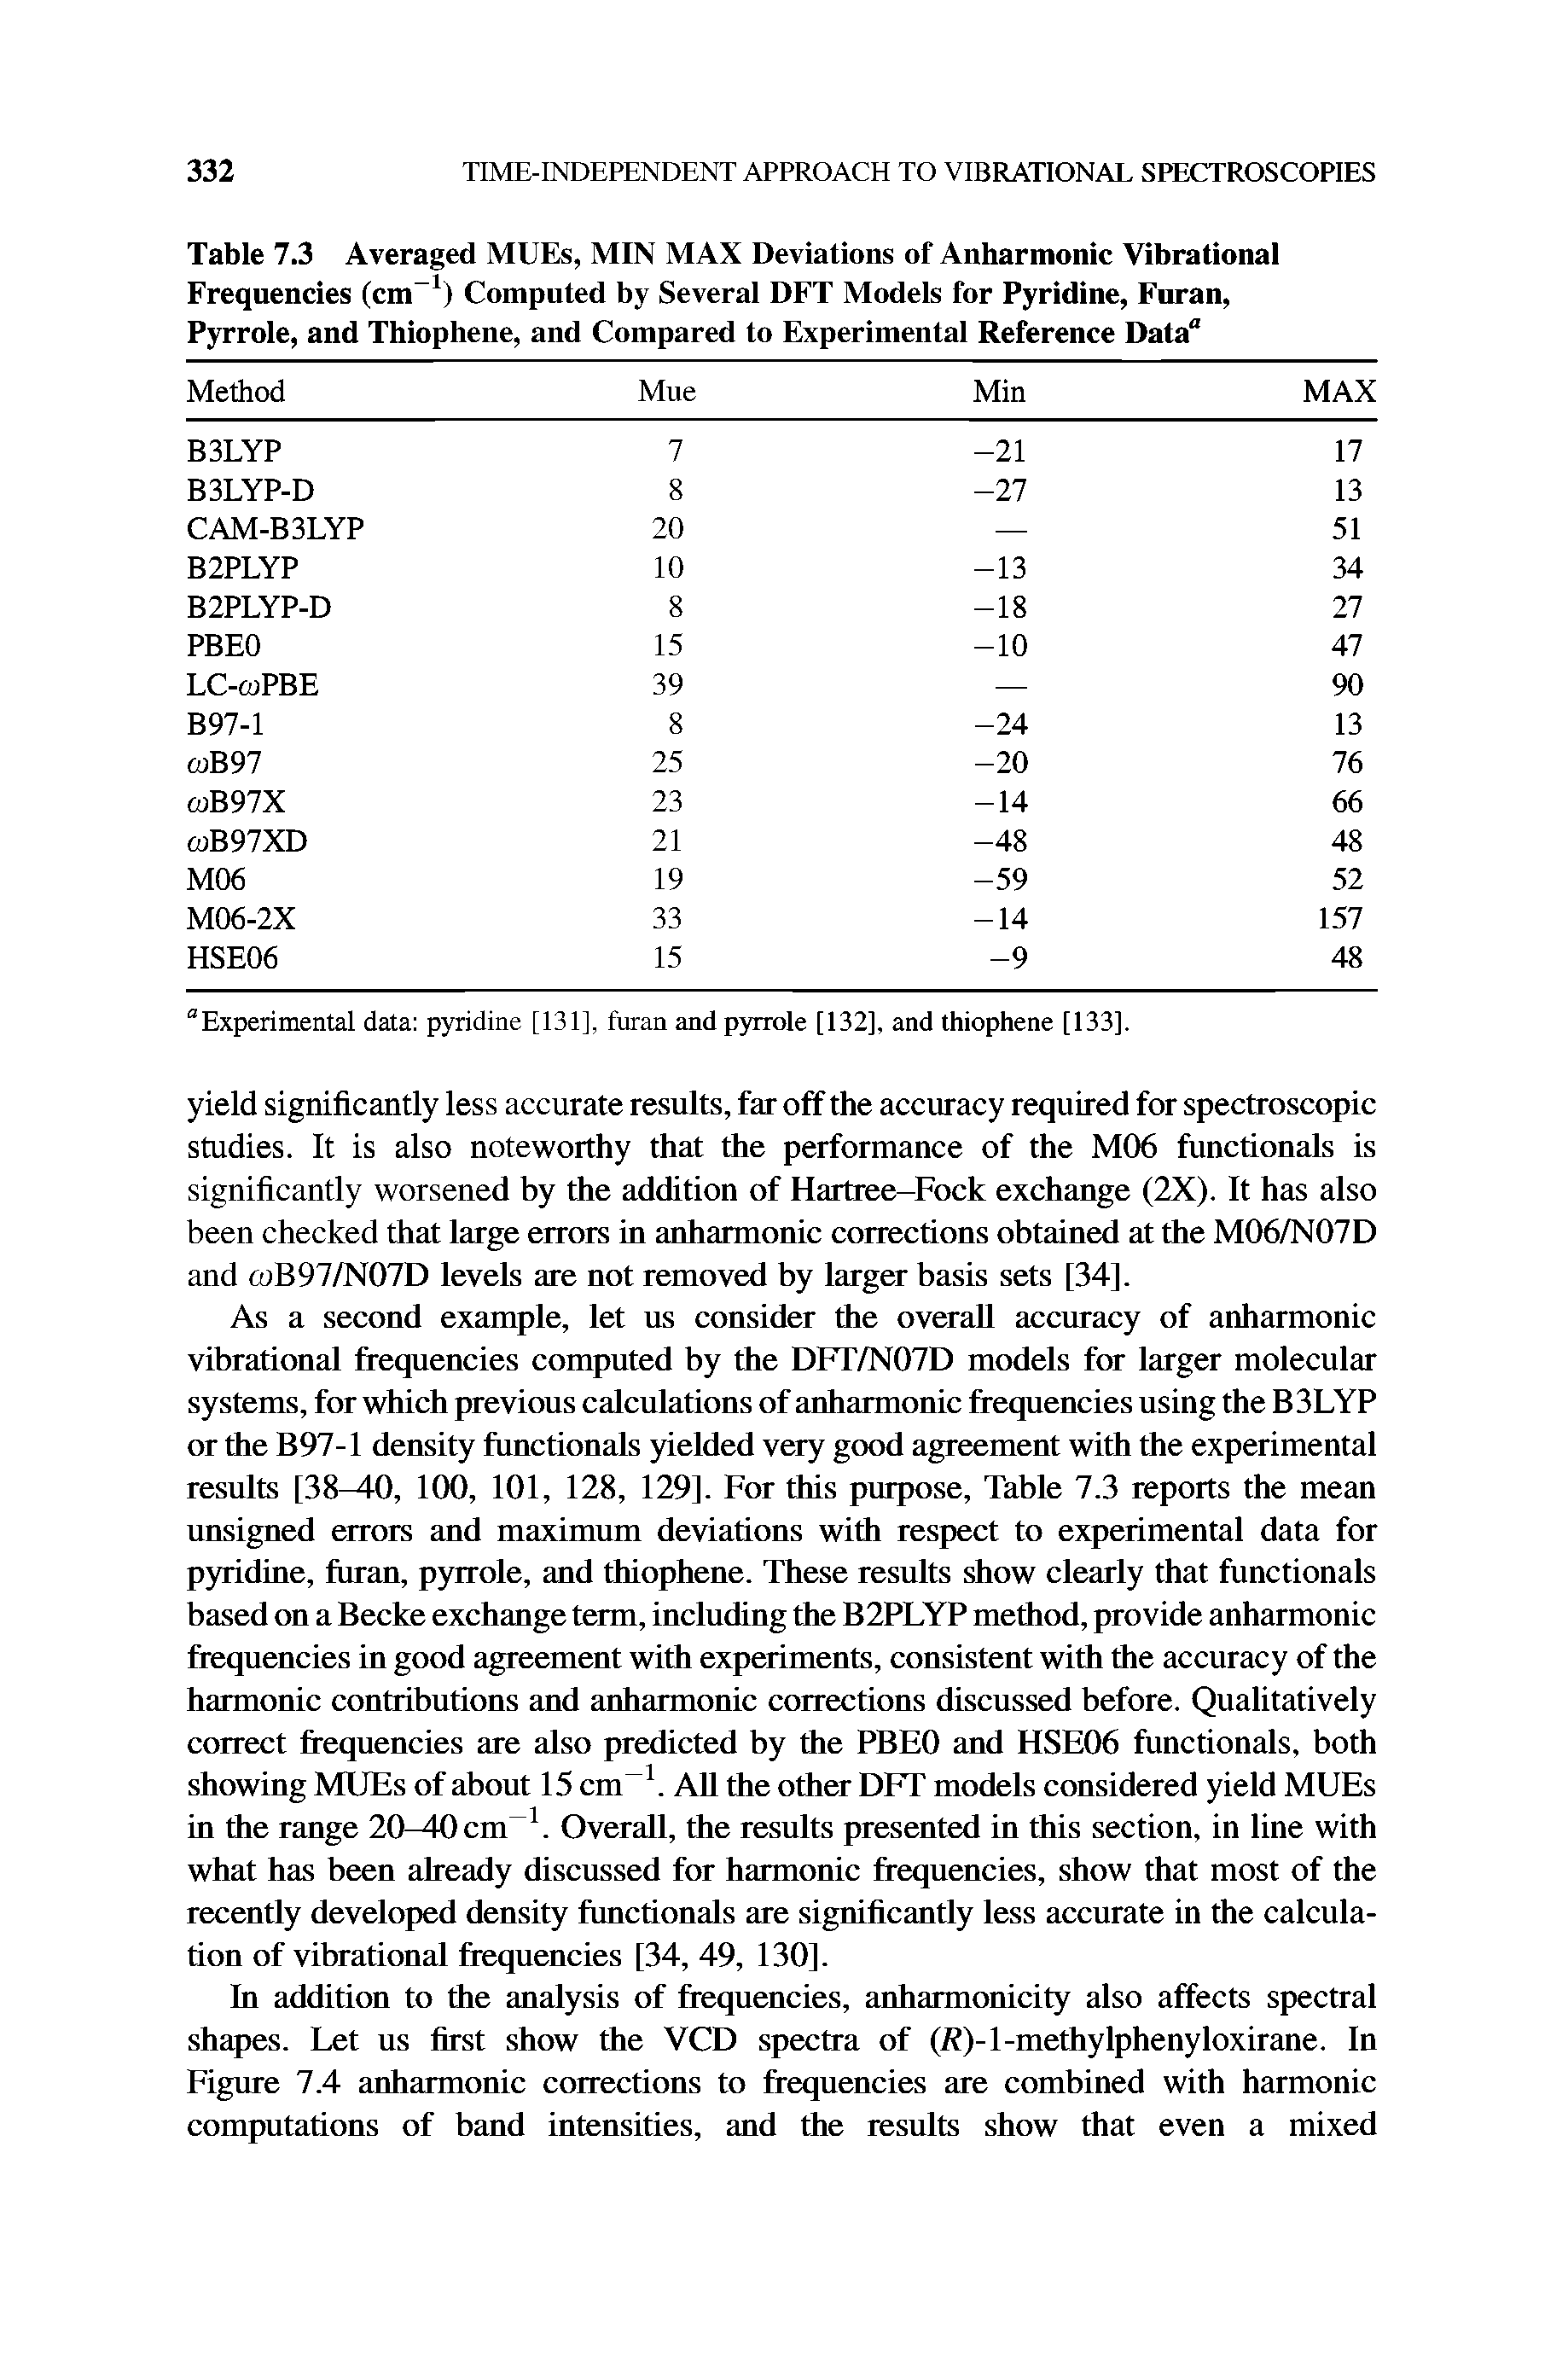 Table 7.3 Averaged MUEs, MIN MAX Deviations of Anharmonic Vibrational Frequencies (cm ) Computed by Several DFT Models for Pyridine, Furan, Pyrrole, and Thiophene, and Compared to Experimental Reference Data"...